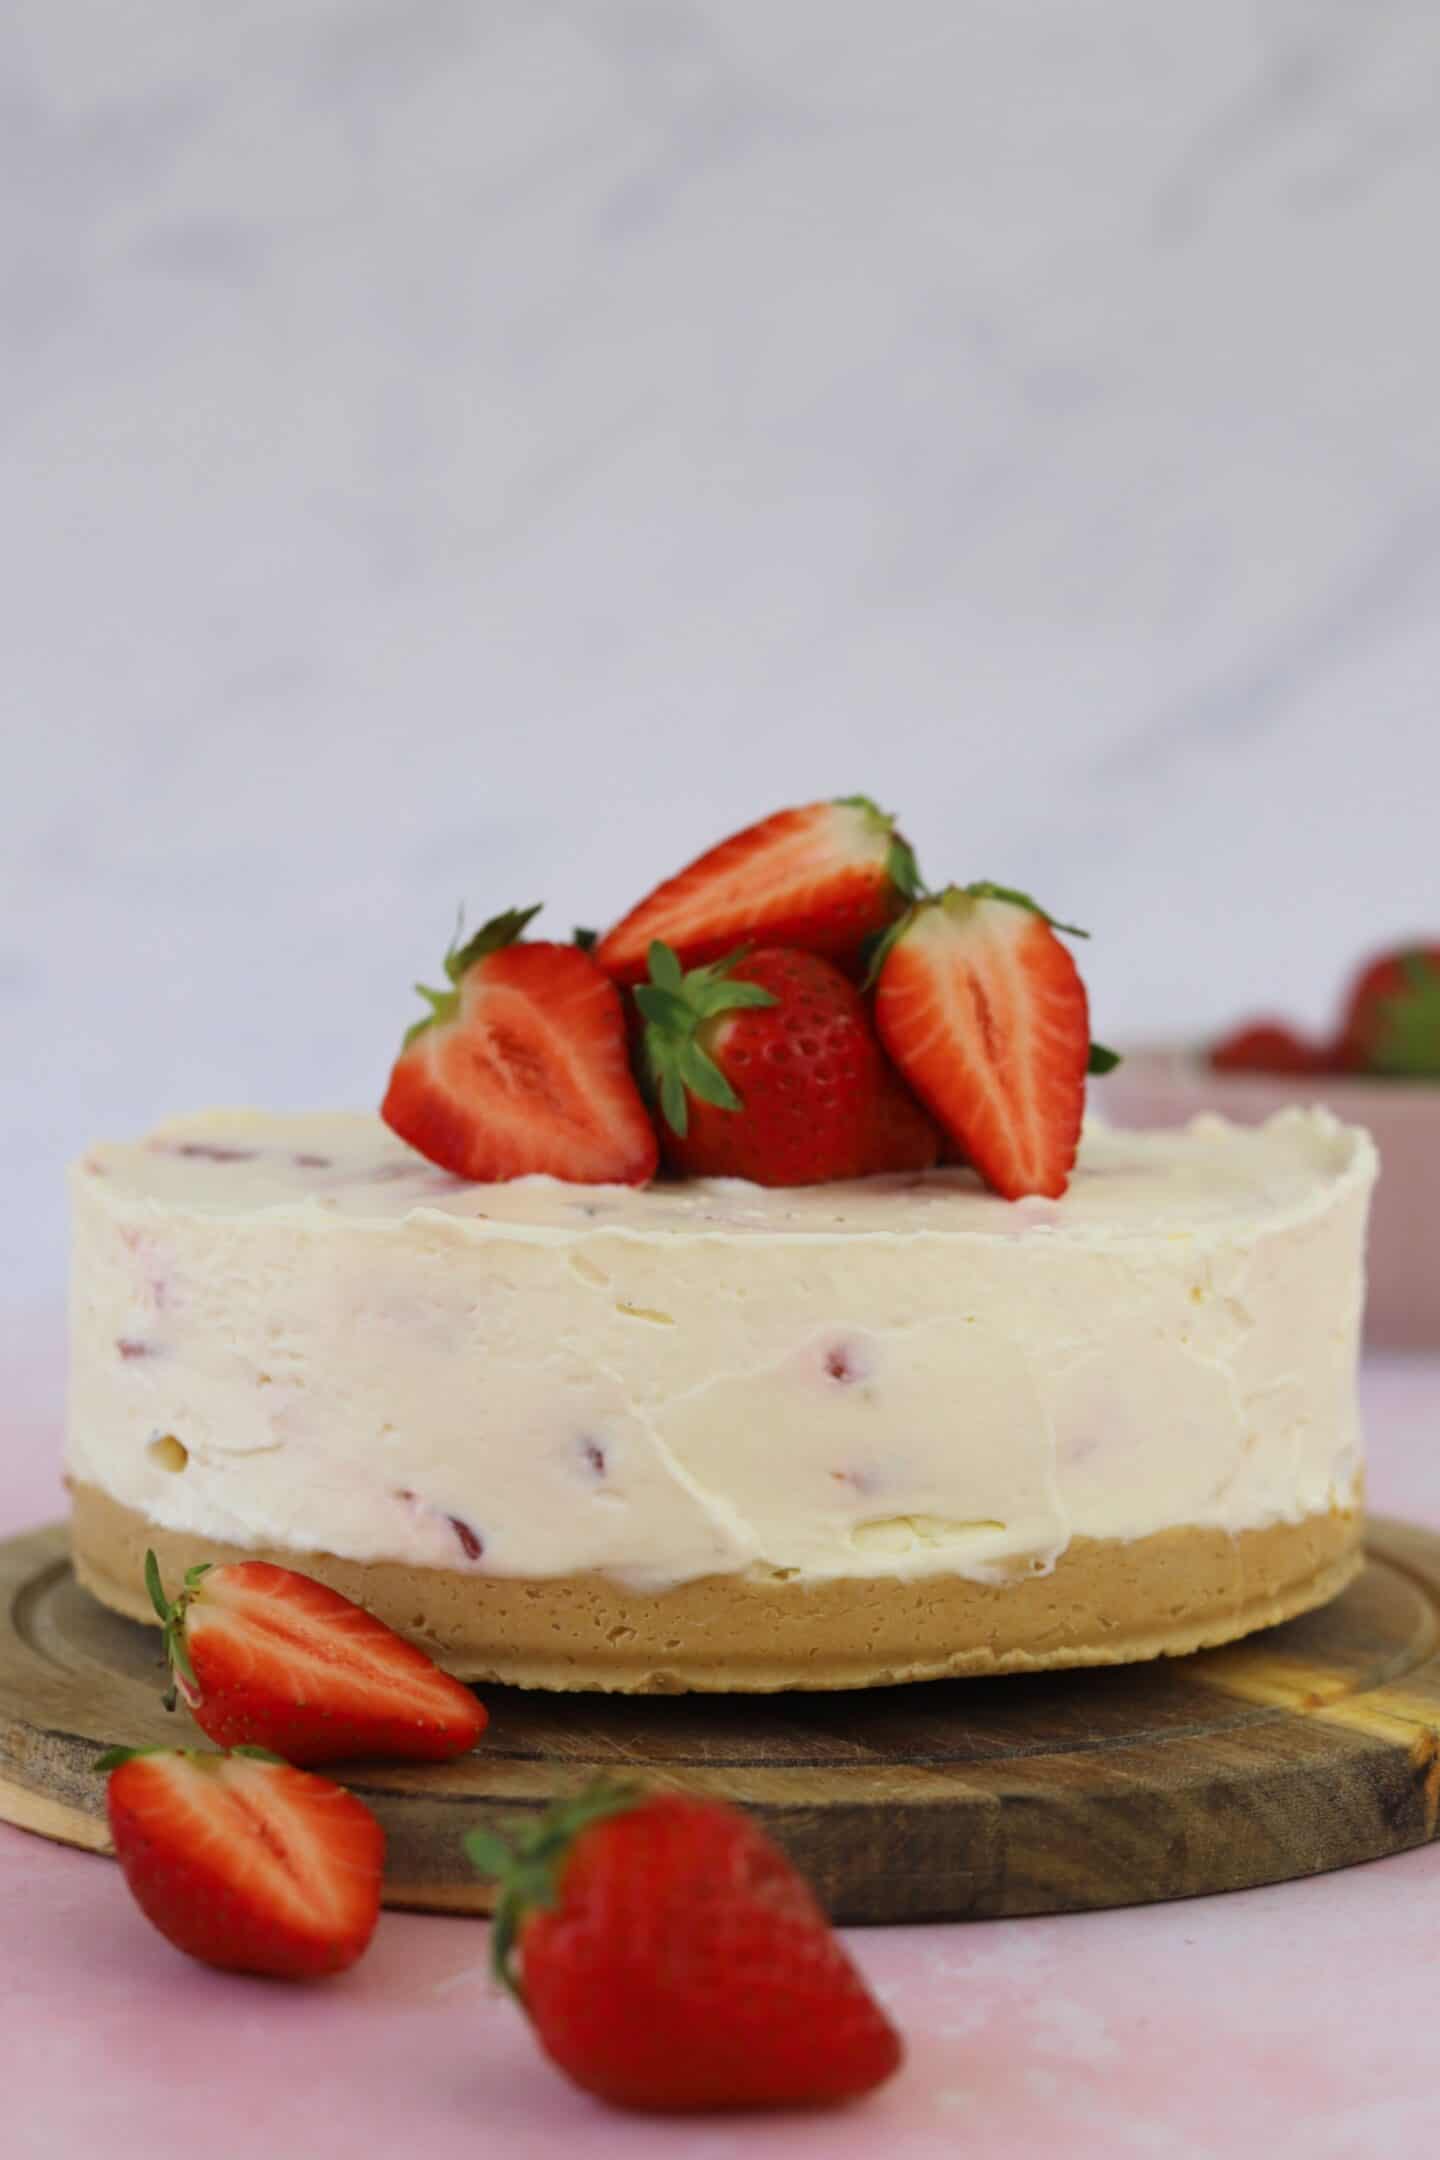 A strawberry cheesecake topped with strawberries on a chopping board.